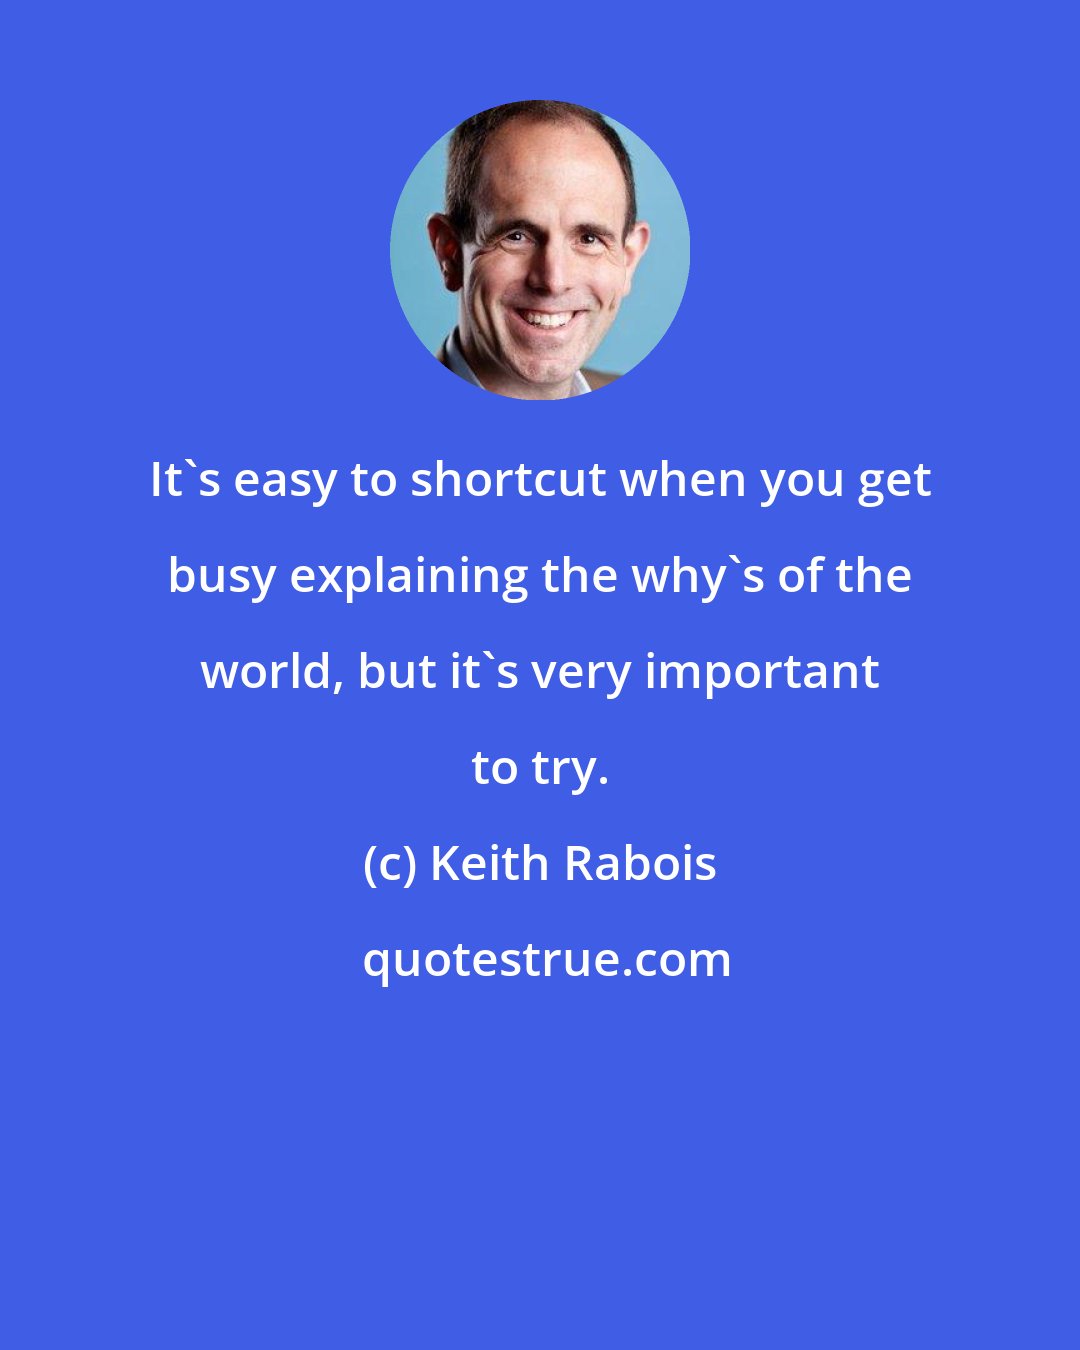 Keith Rabois: It's easy to shortcut when you get busy explaining the why's of the world, but it's very important to try.